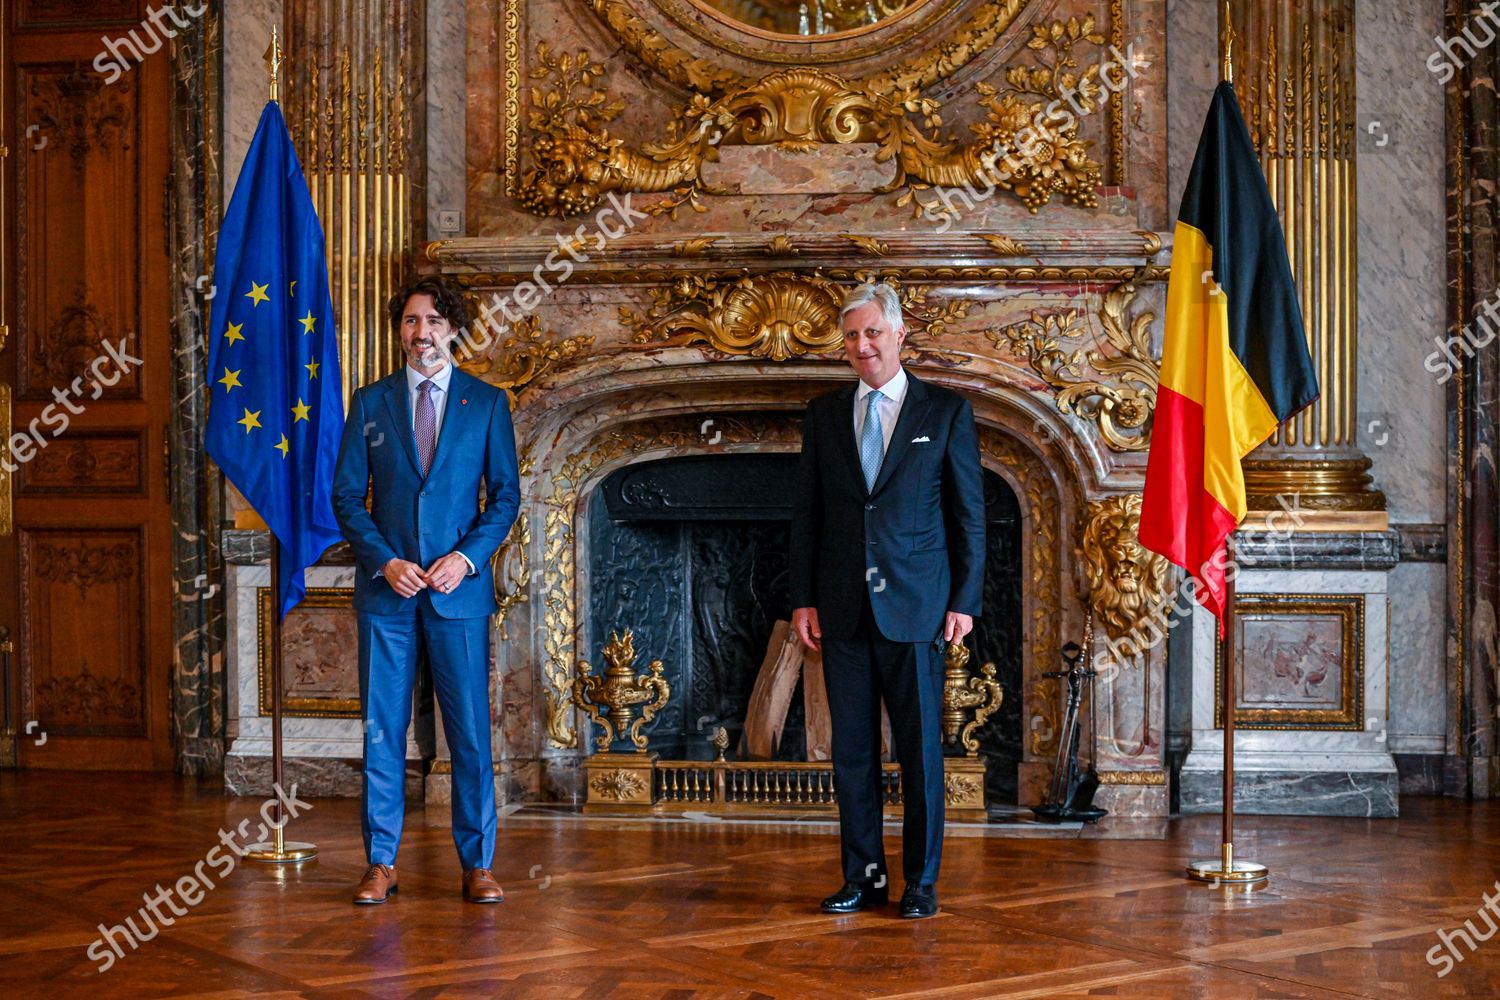 king-philippe-receives-canadian-prime-minister-justin-trudeau-brussels-belgium-shutterstock-editorial-12084205c.jpg